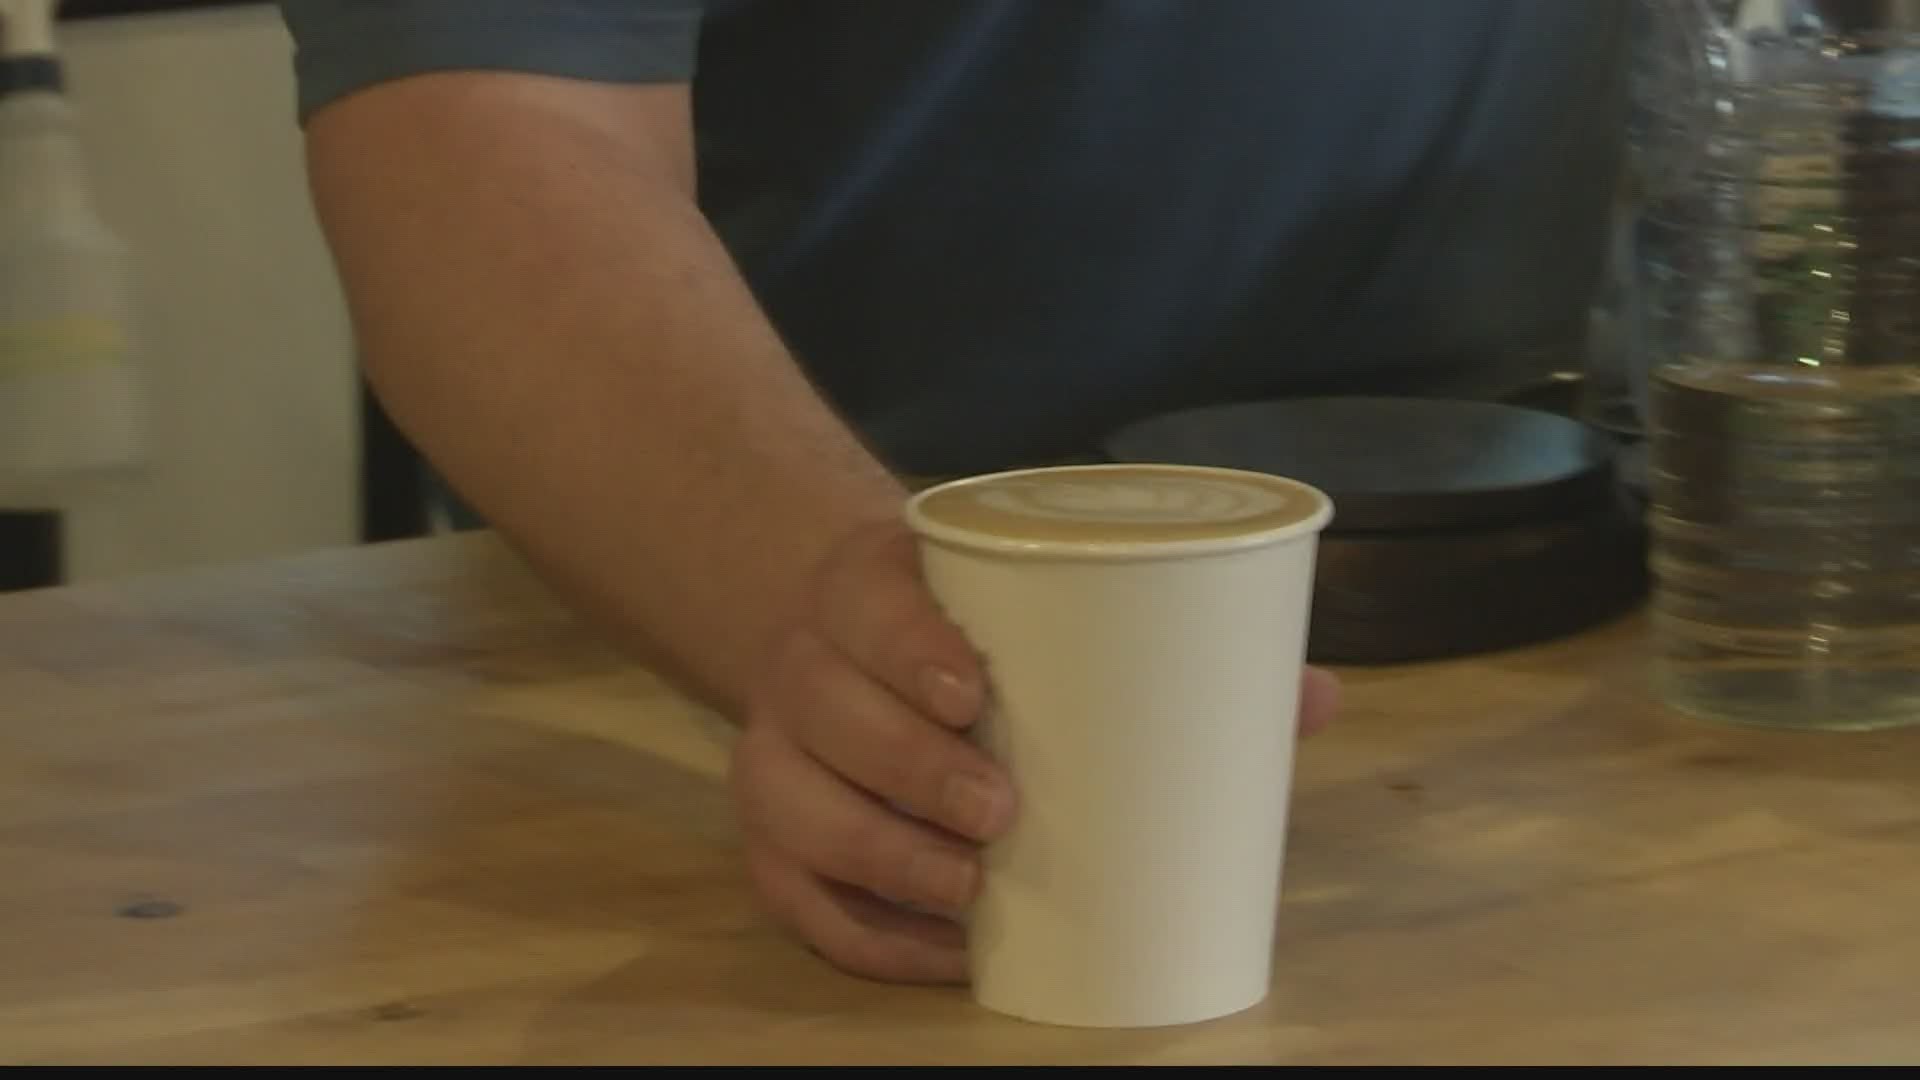 OffBeat Coffee, located at campus 805, has made some big changes to the way you get your morning coffee.